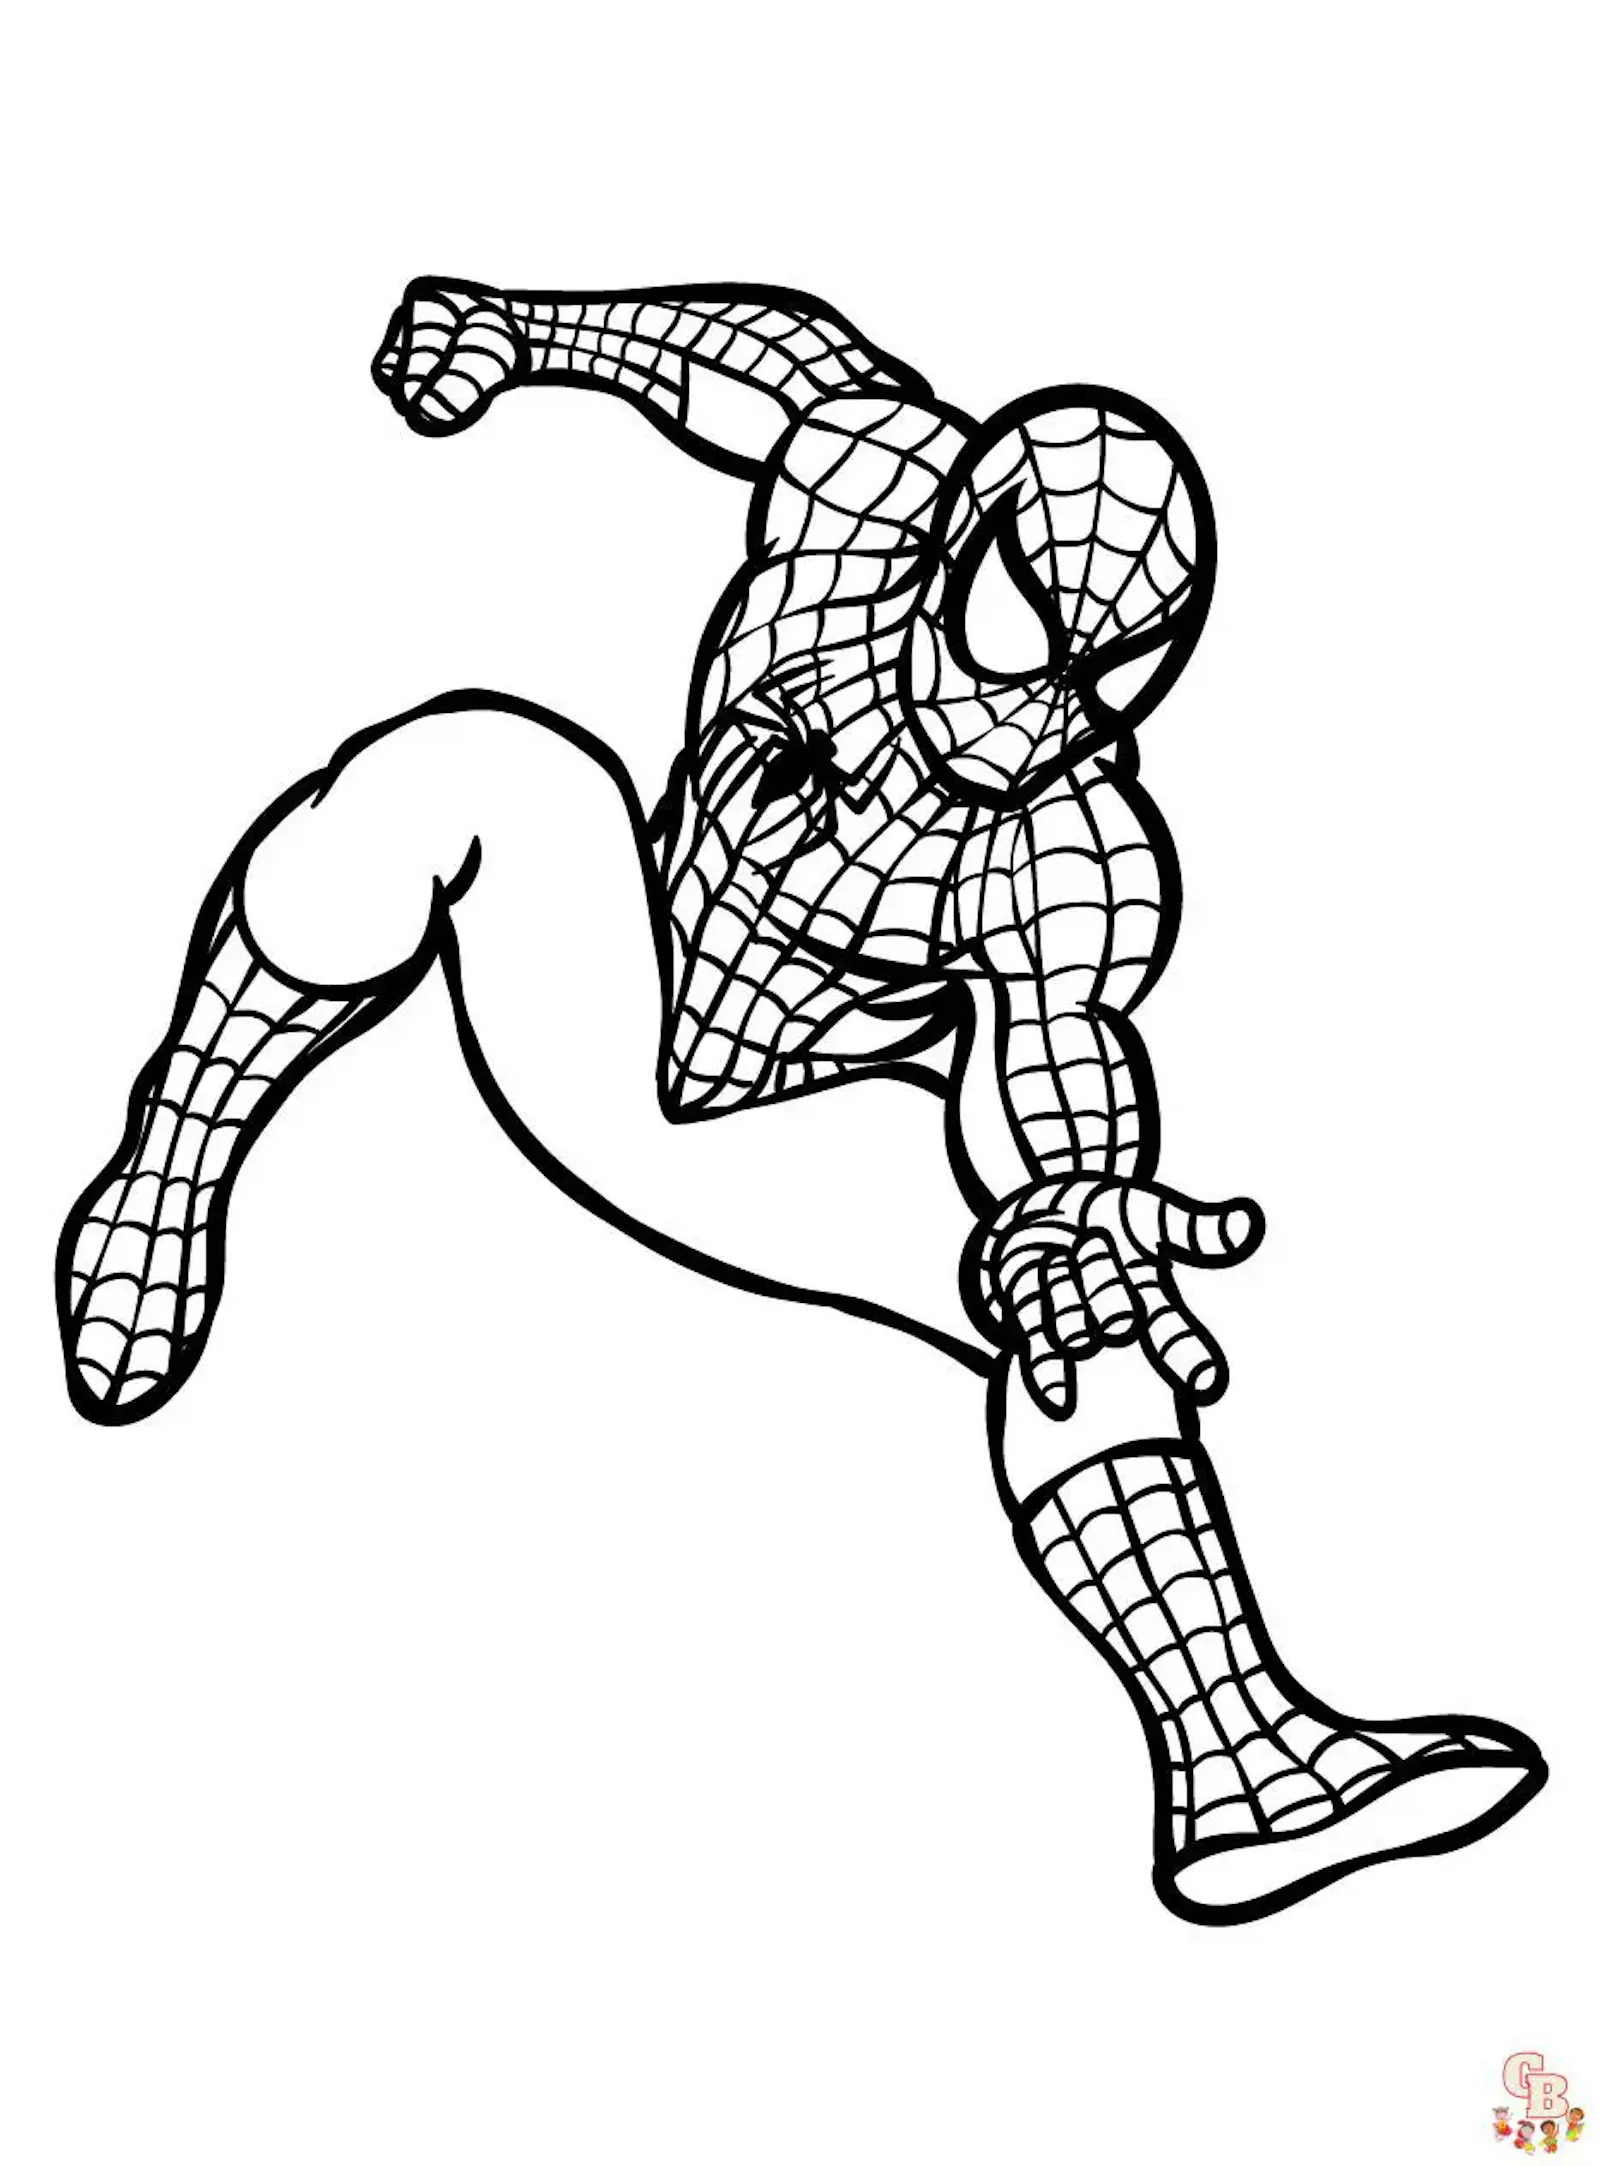 Spider-Man - Free printable Coloring pages for kids